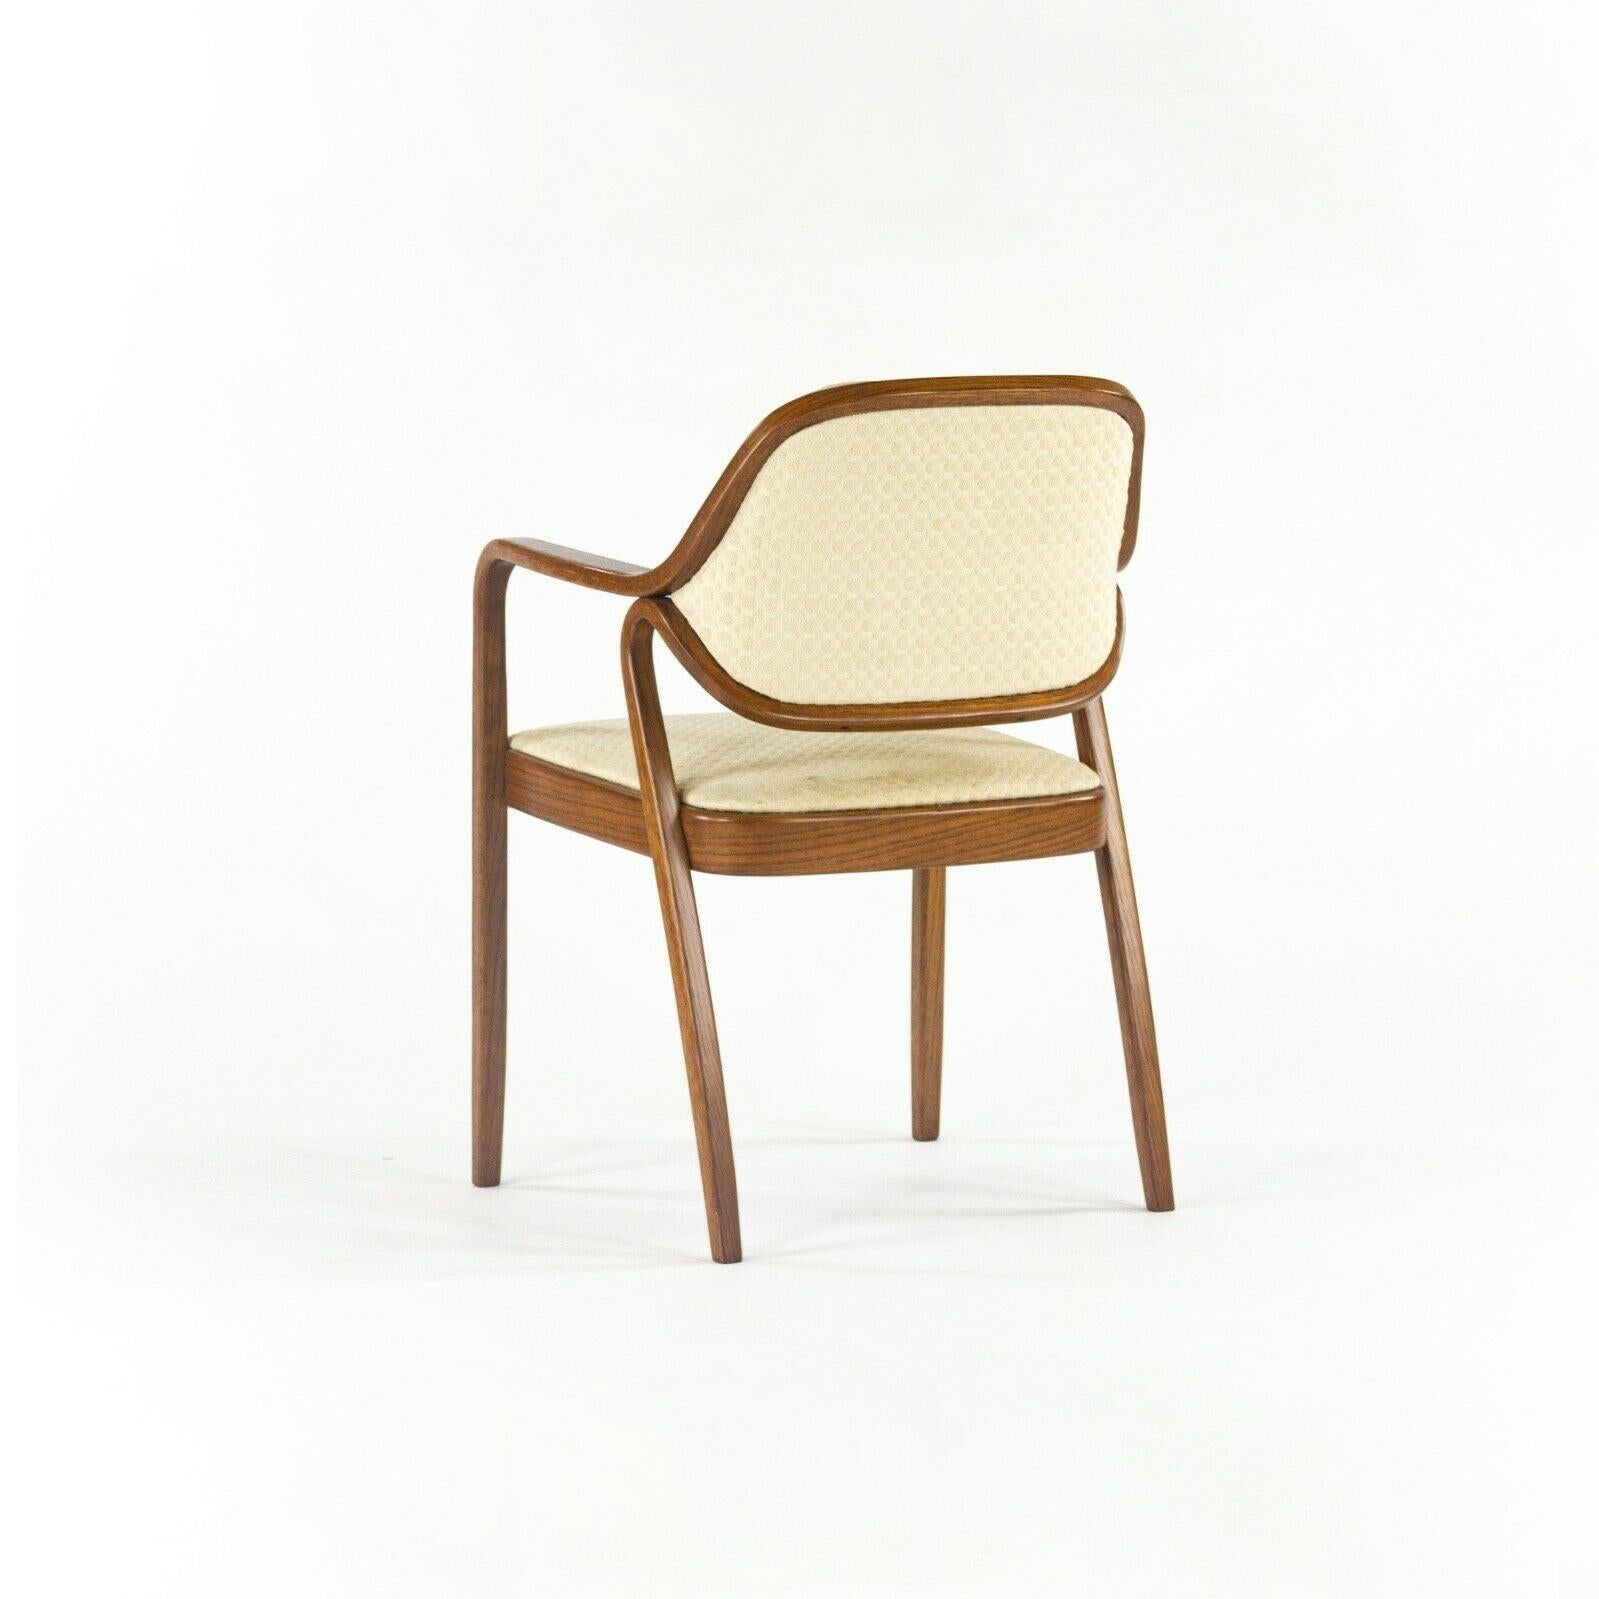 1980s Pair of Don Petitt for Knoll 1105 Bentwood Armchair in Oak with Tan Fabric For Sale 1